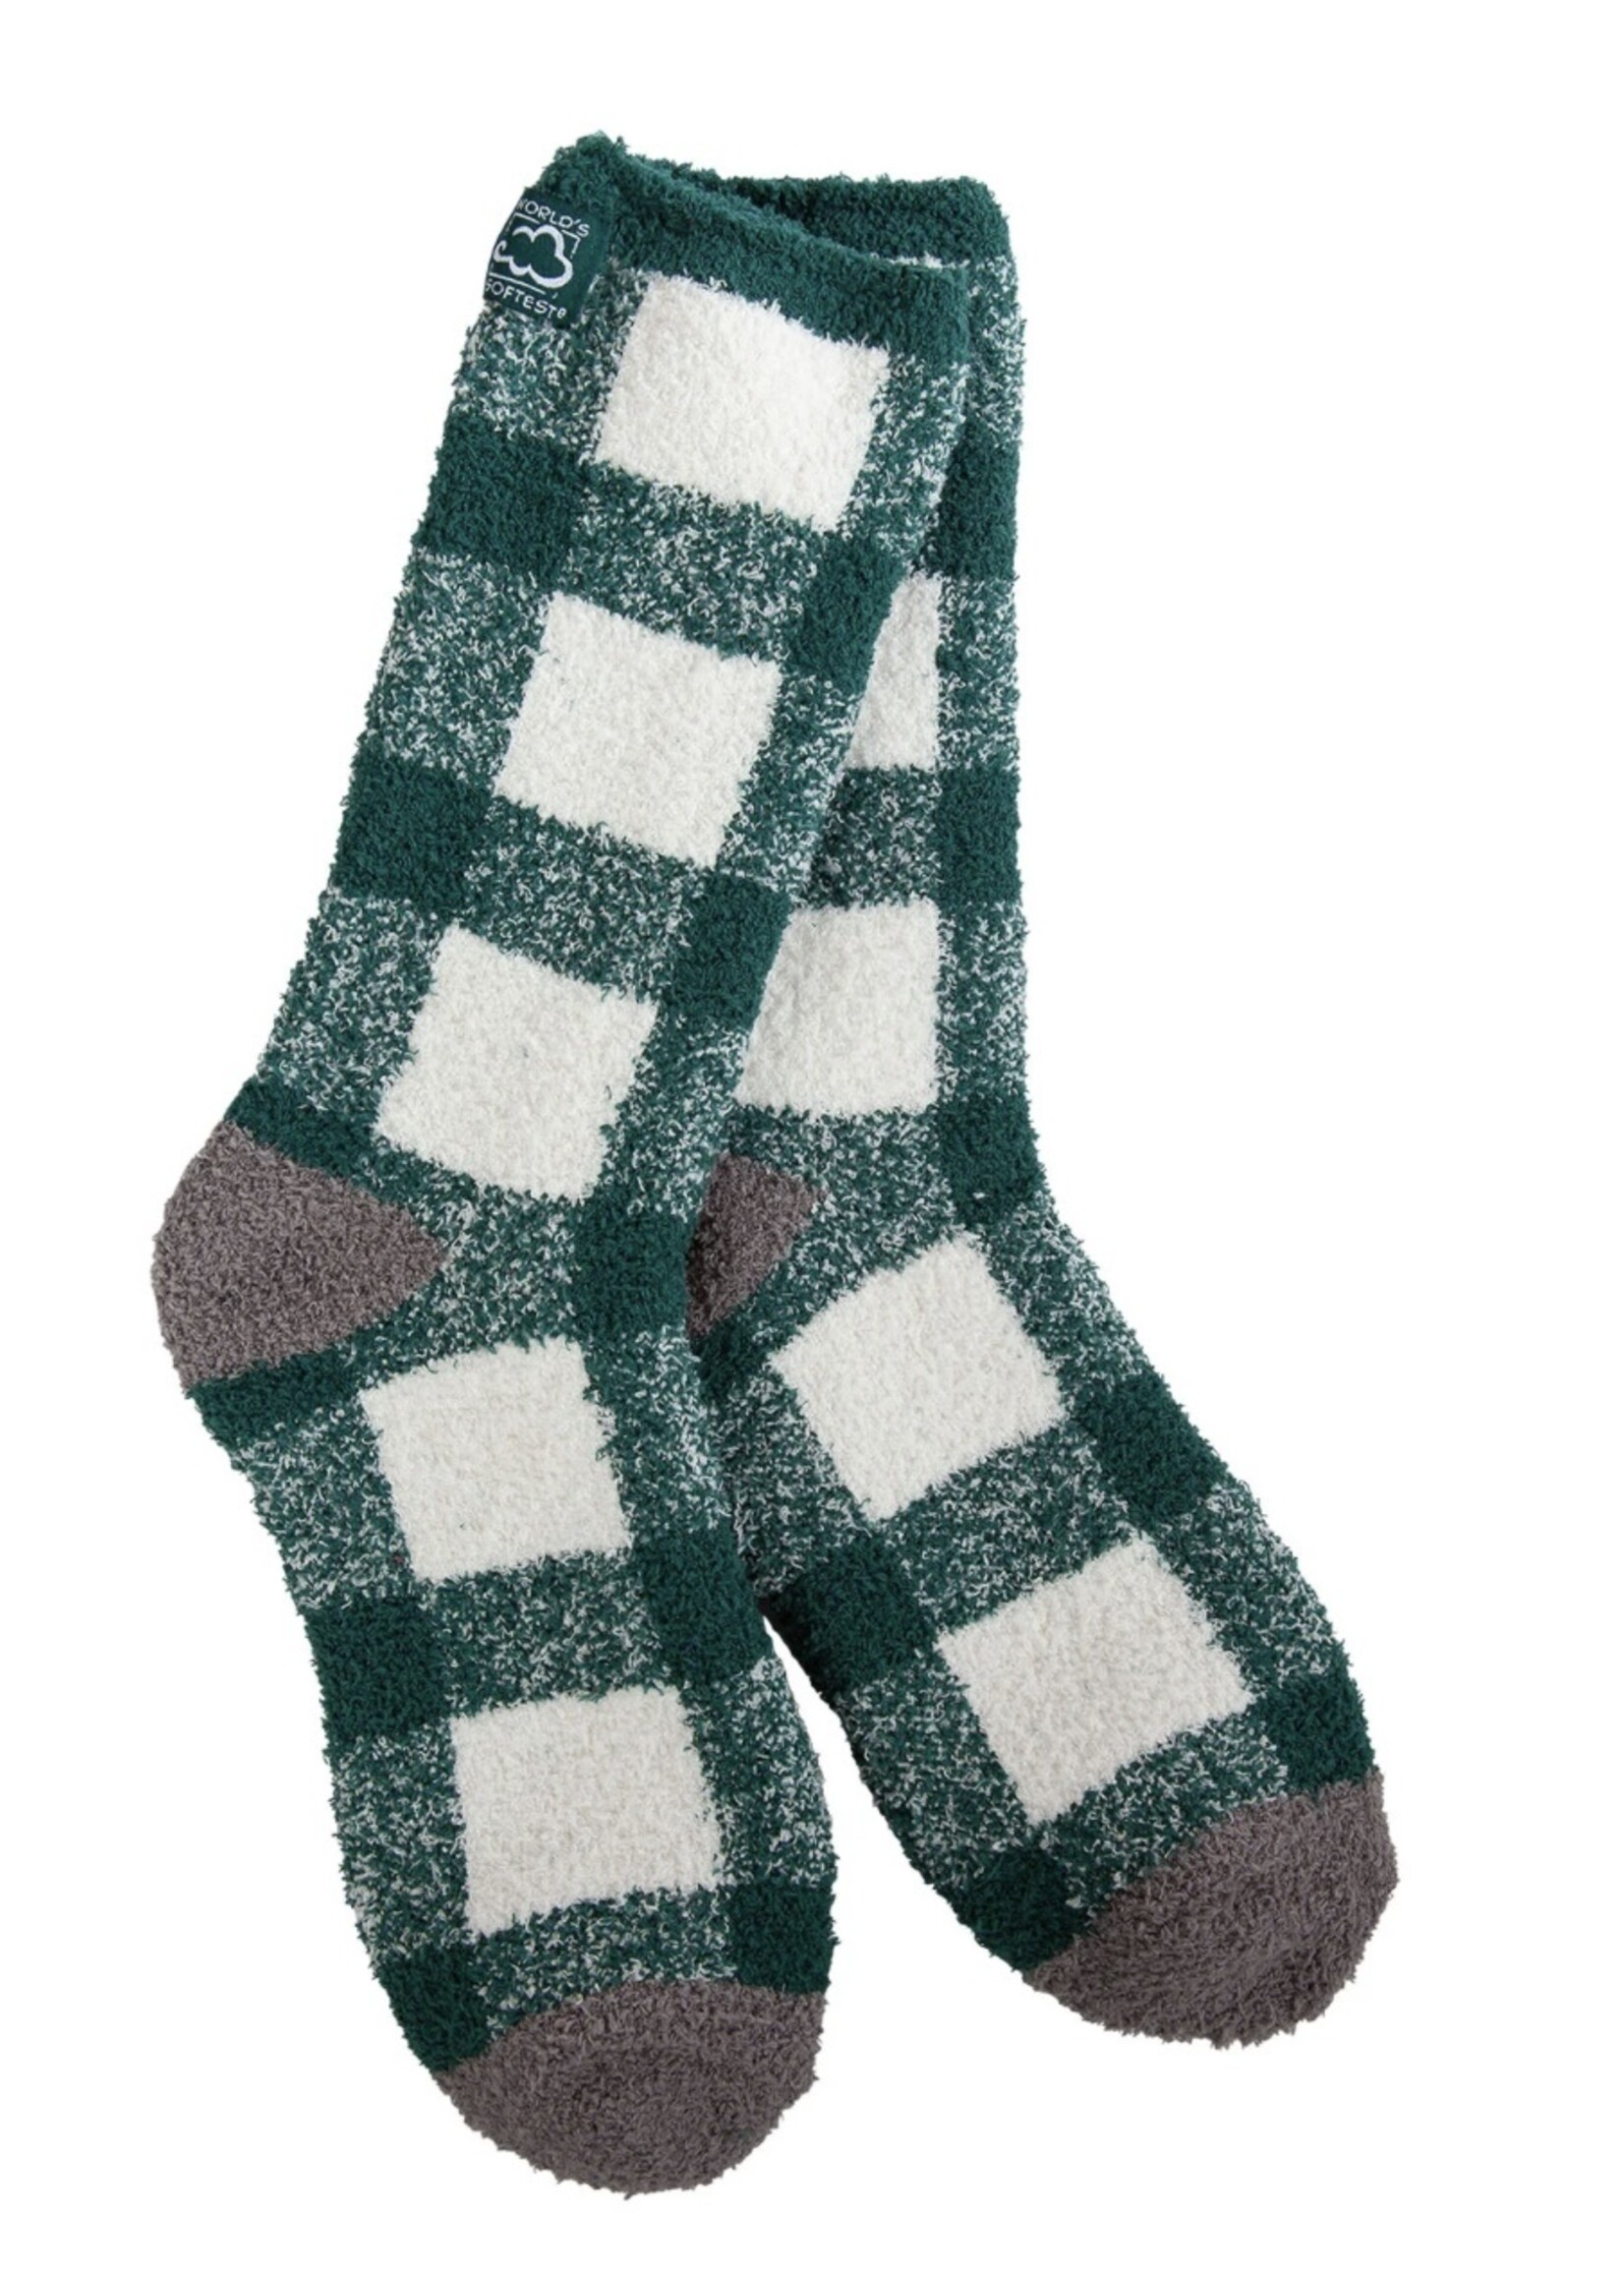 Team Collection Cozy Socks-Green